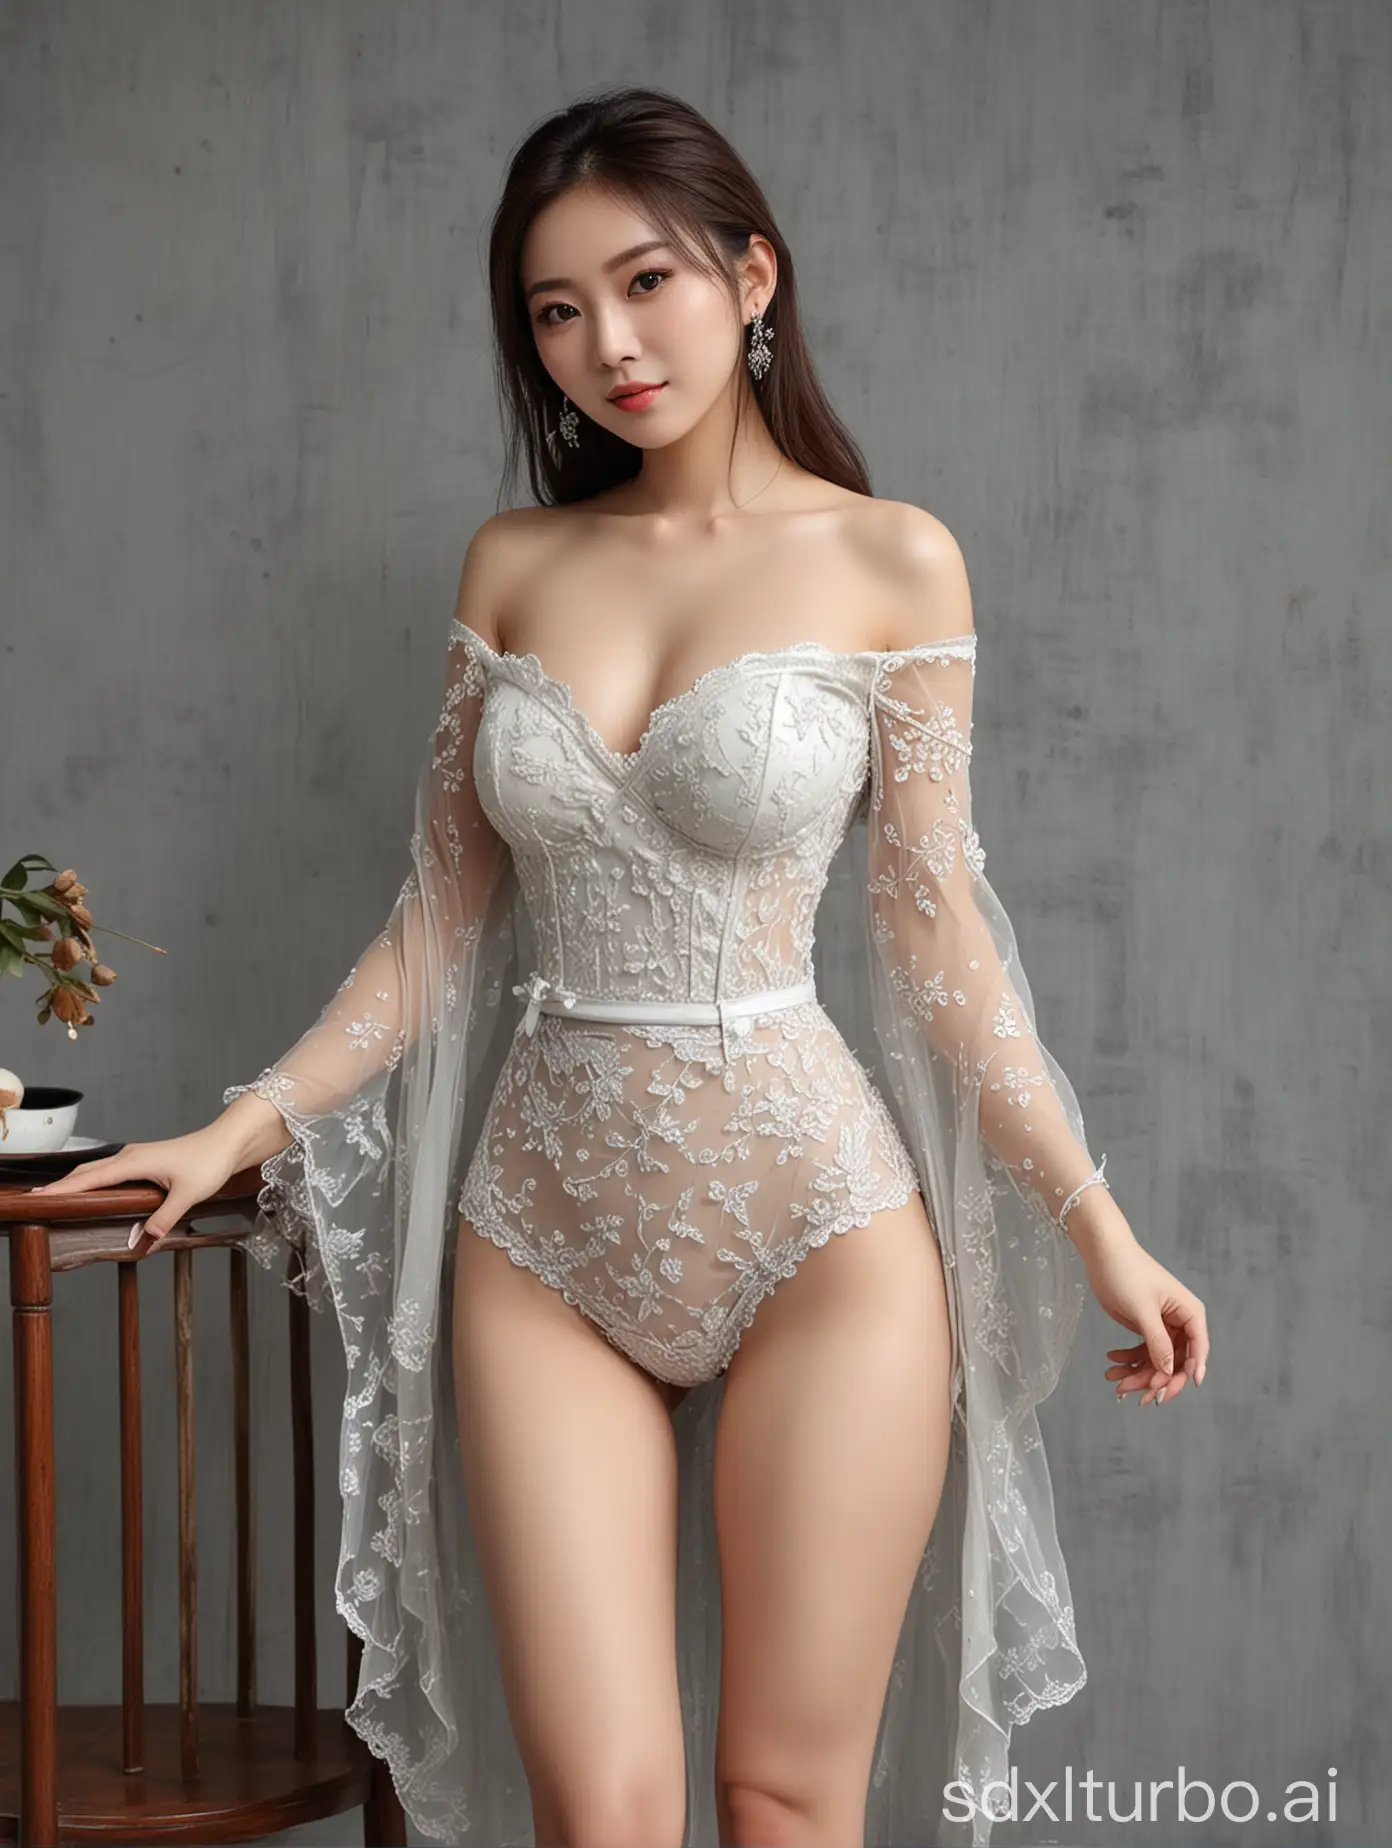 Elegant-Chinese-Woman-in-Full-Body-Portrait-Captivating-Beauty-and-Grace